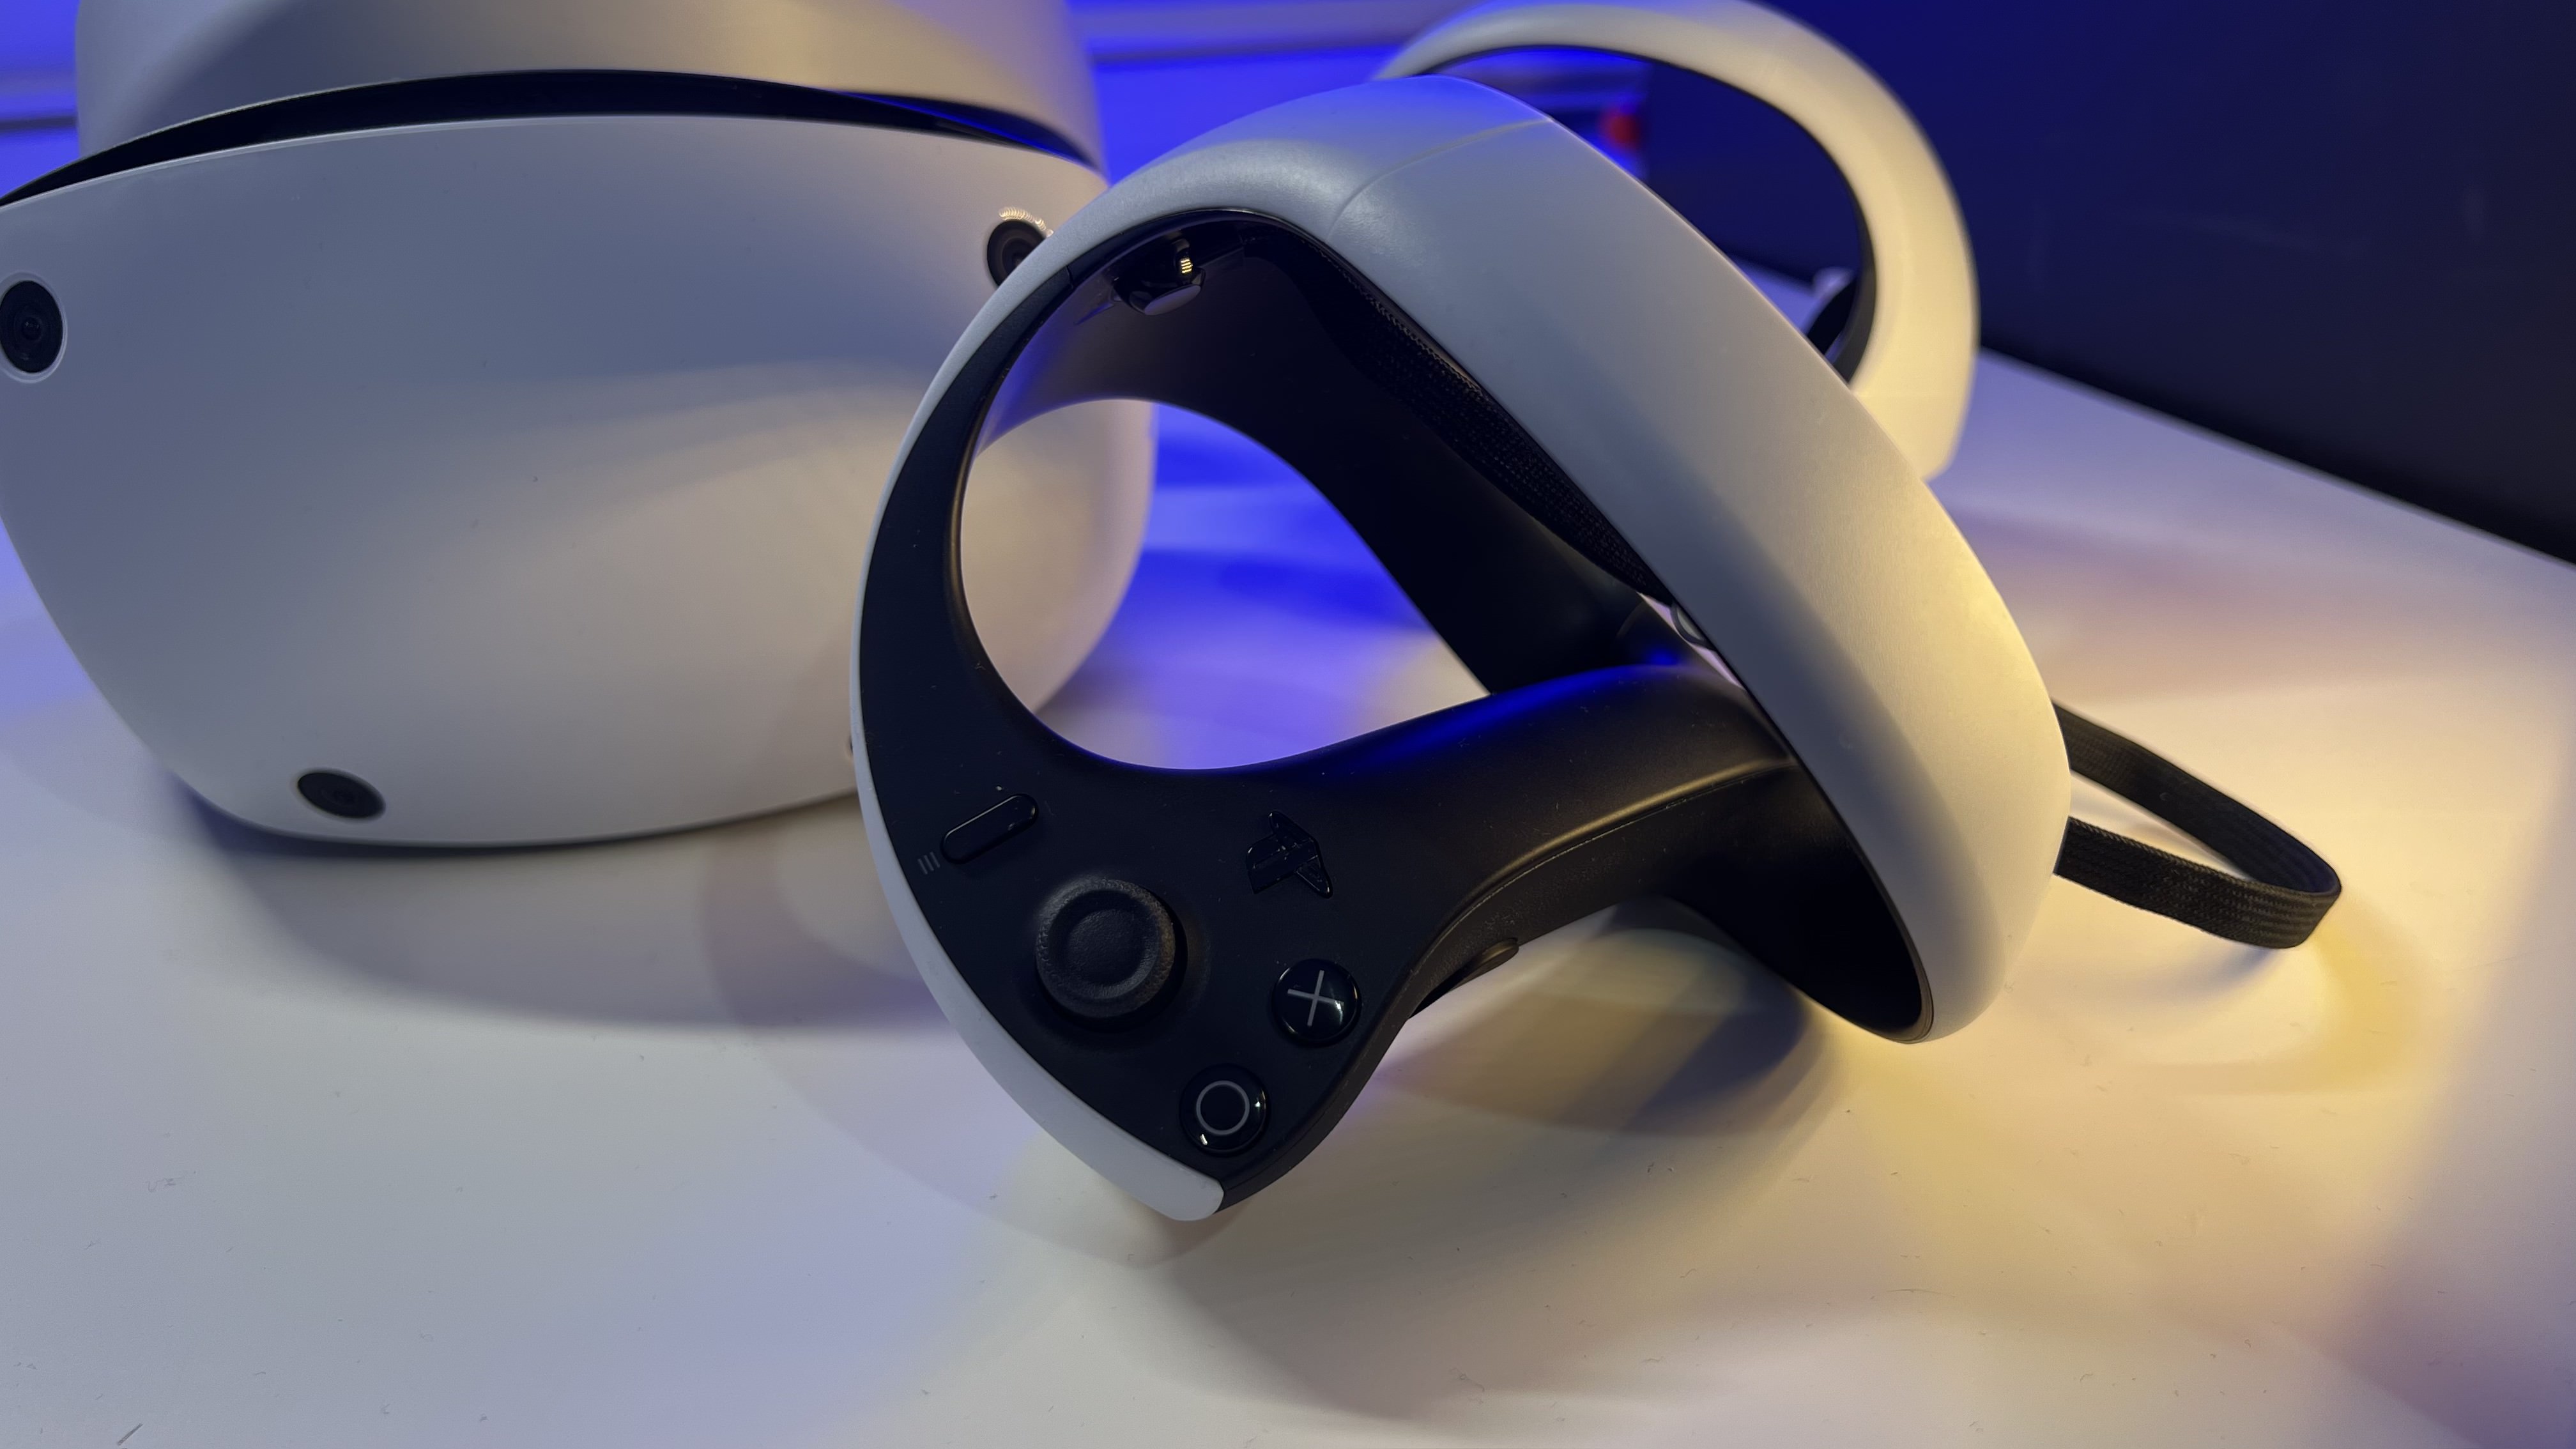 Review: PlayStation VR2 is a huge leap that still can't escape its